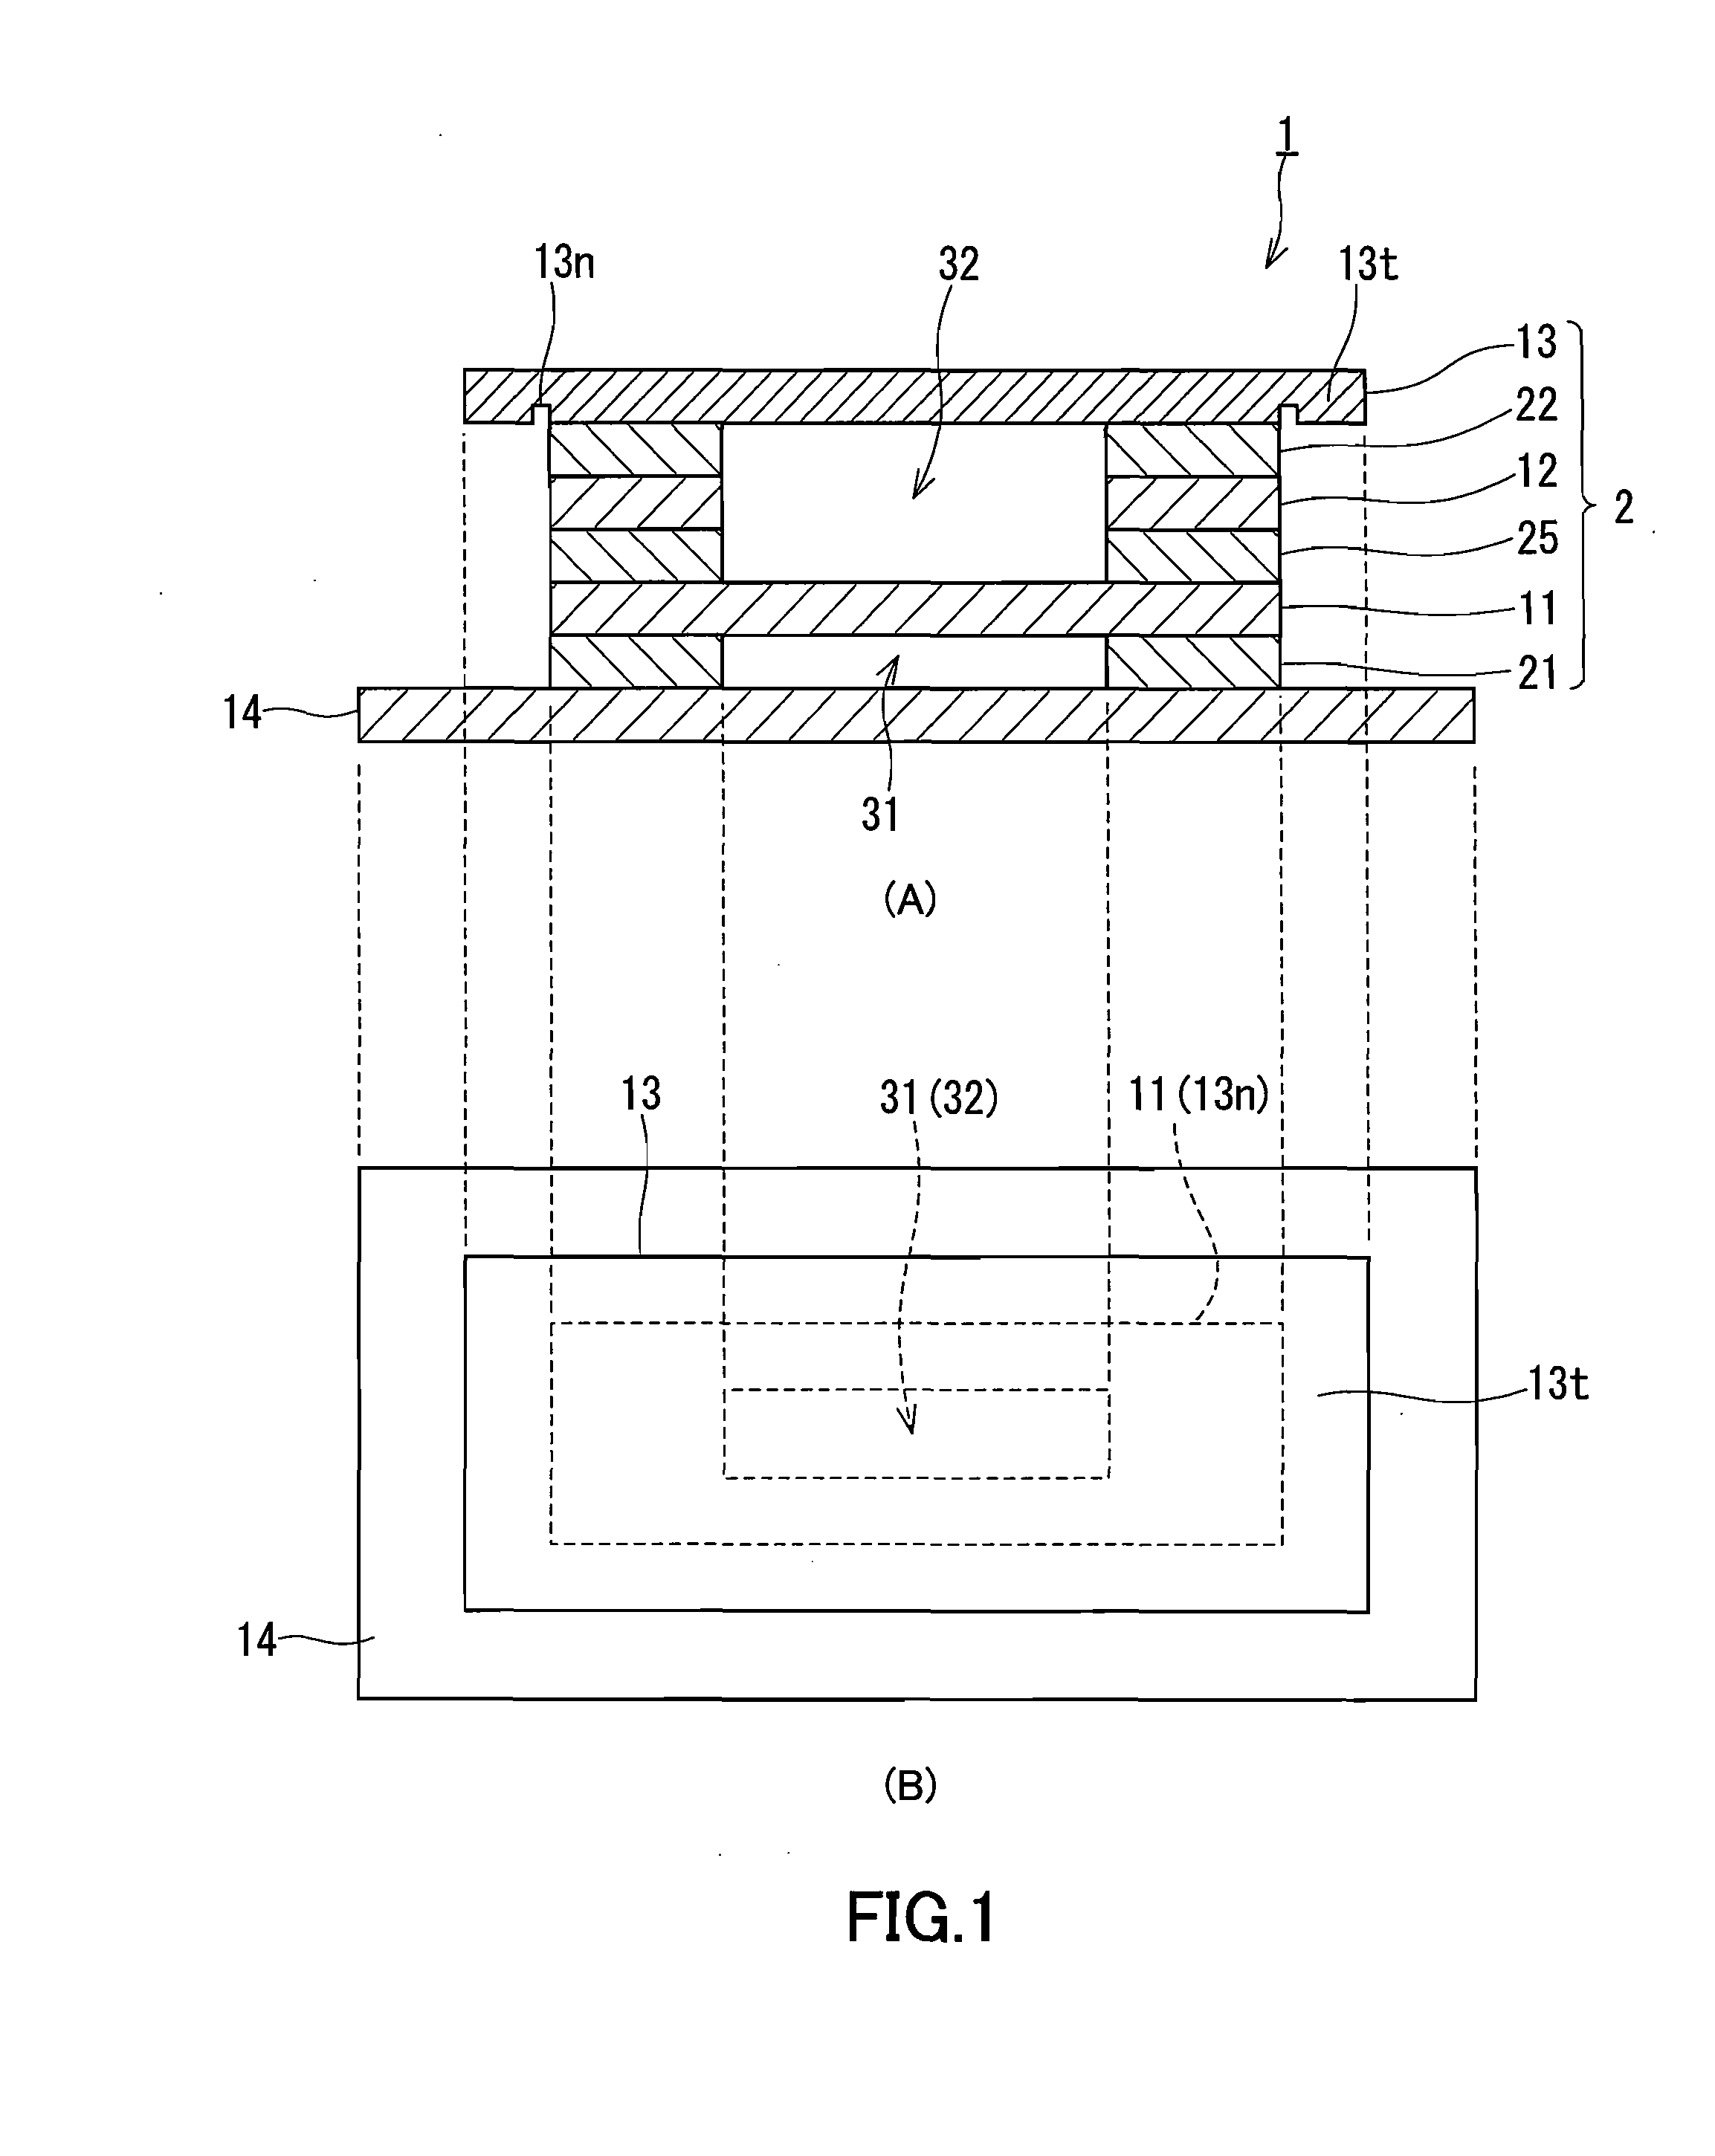 Water-proof sound-transmitting member and method for producing same, and supported water-proof sound-transmitting member